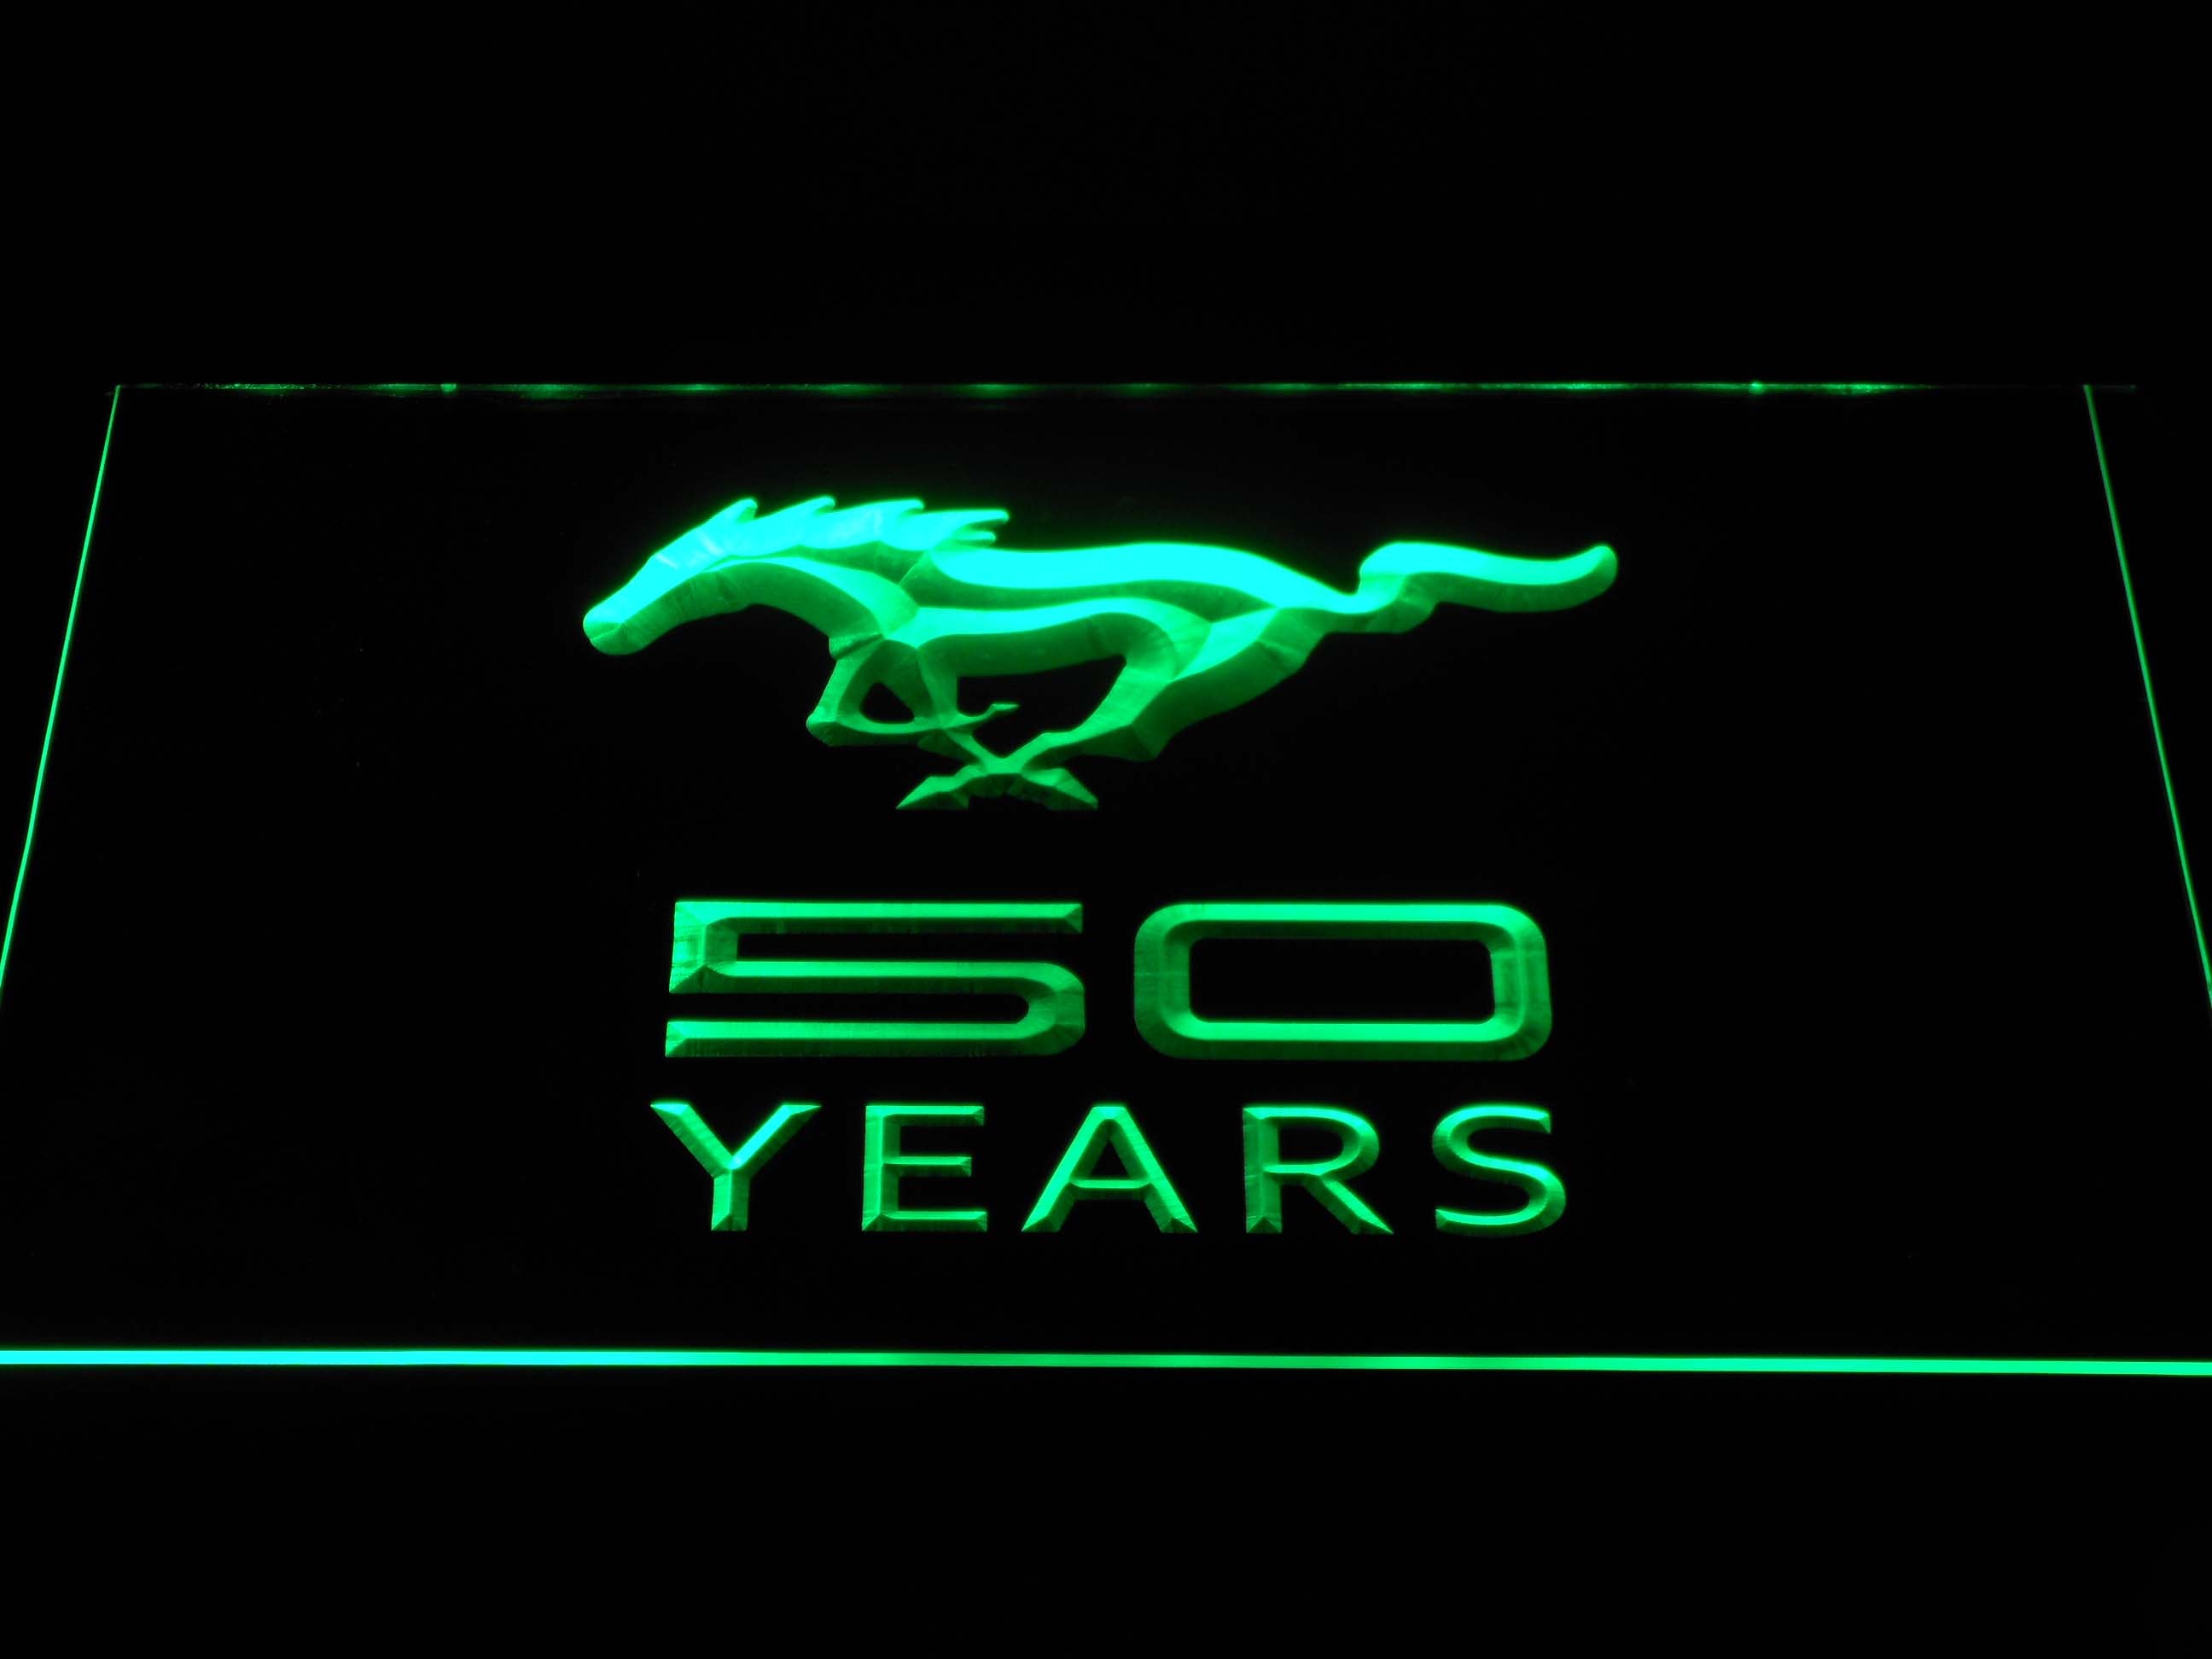 Ford Mustang 50 Years Neon Light LED Sign